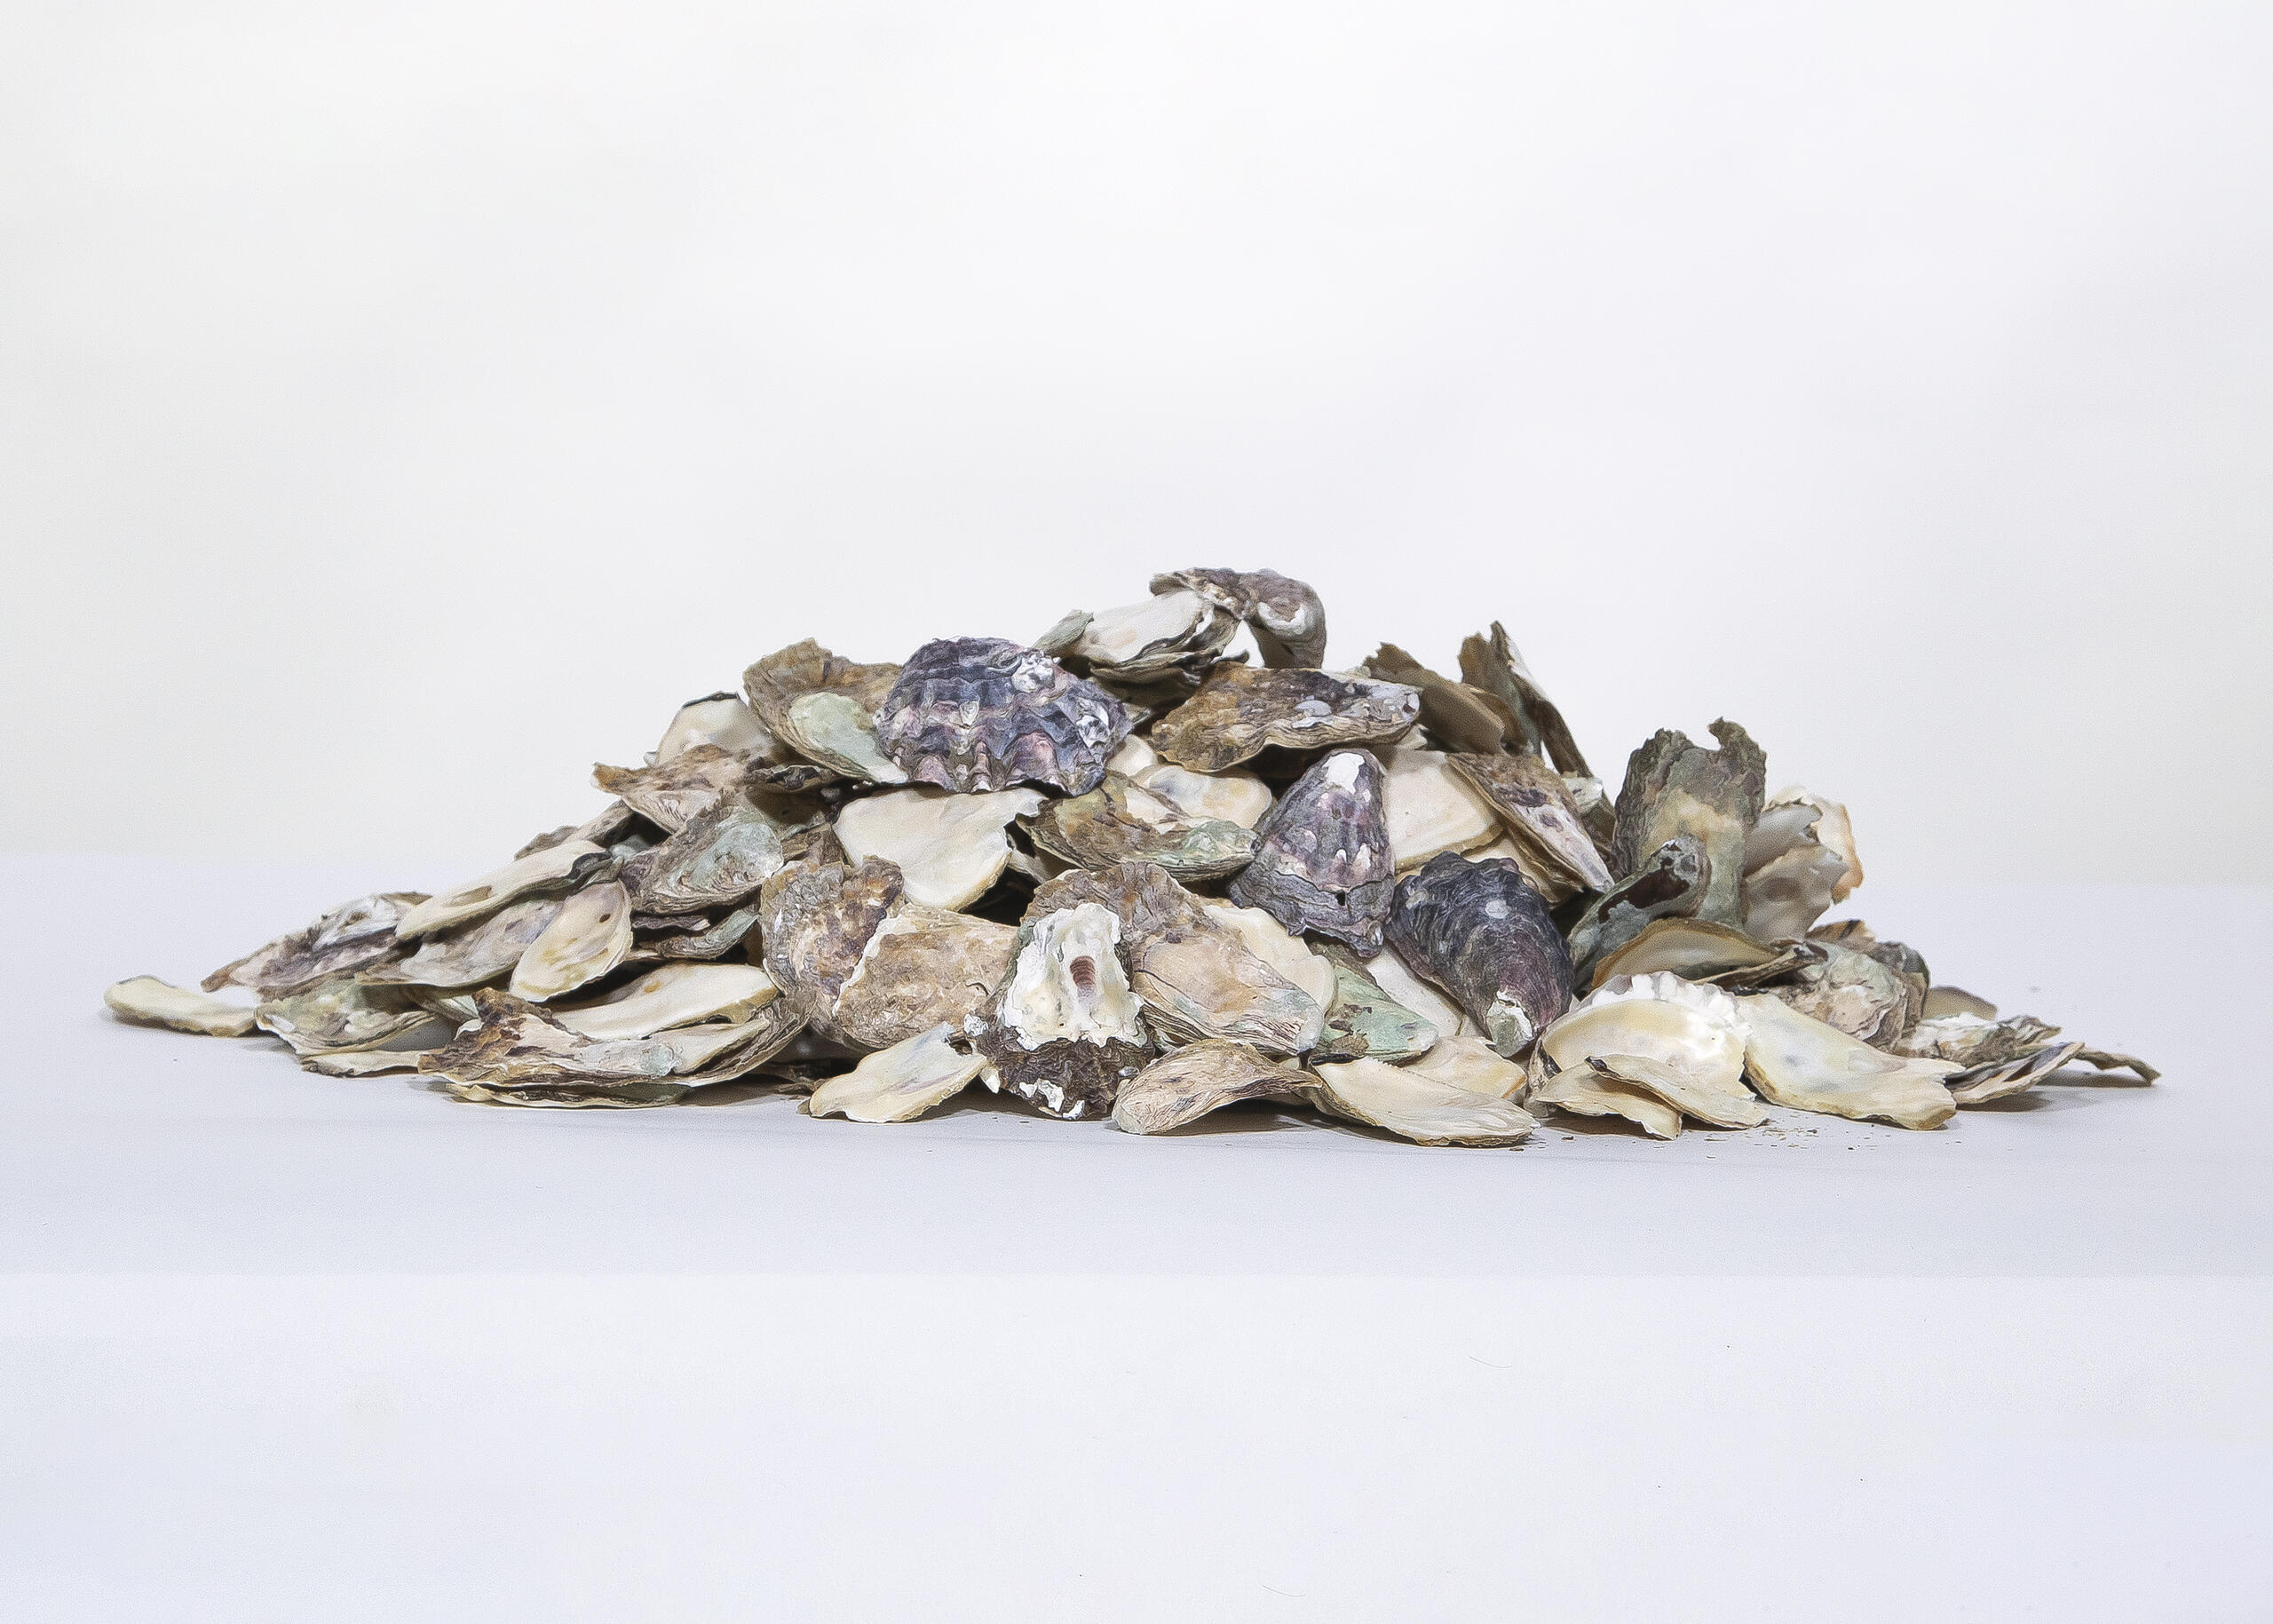 Pile of oyster shells